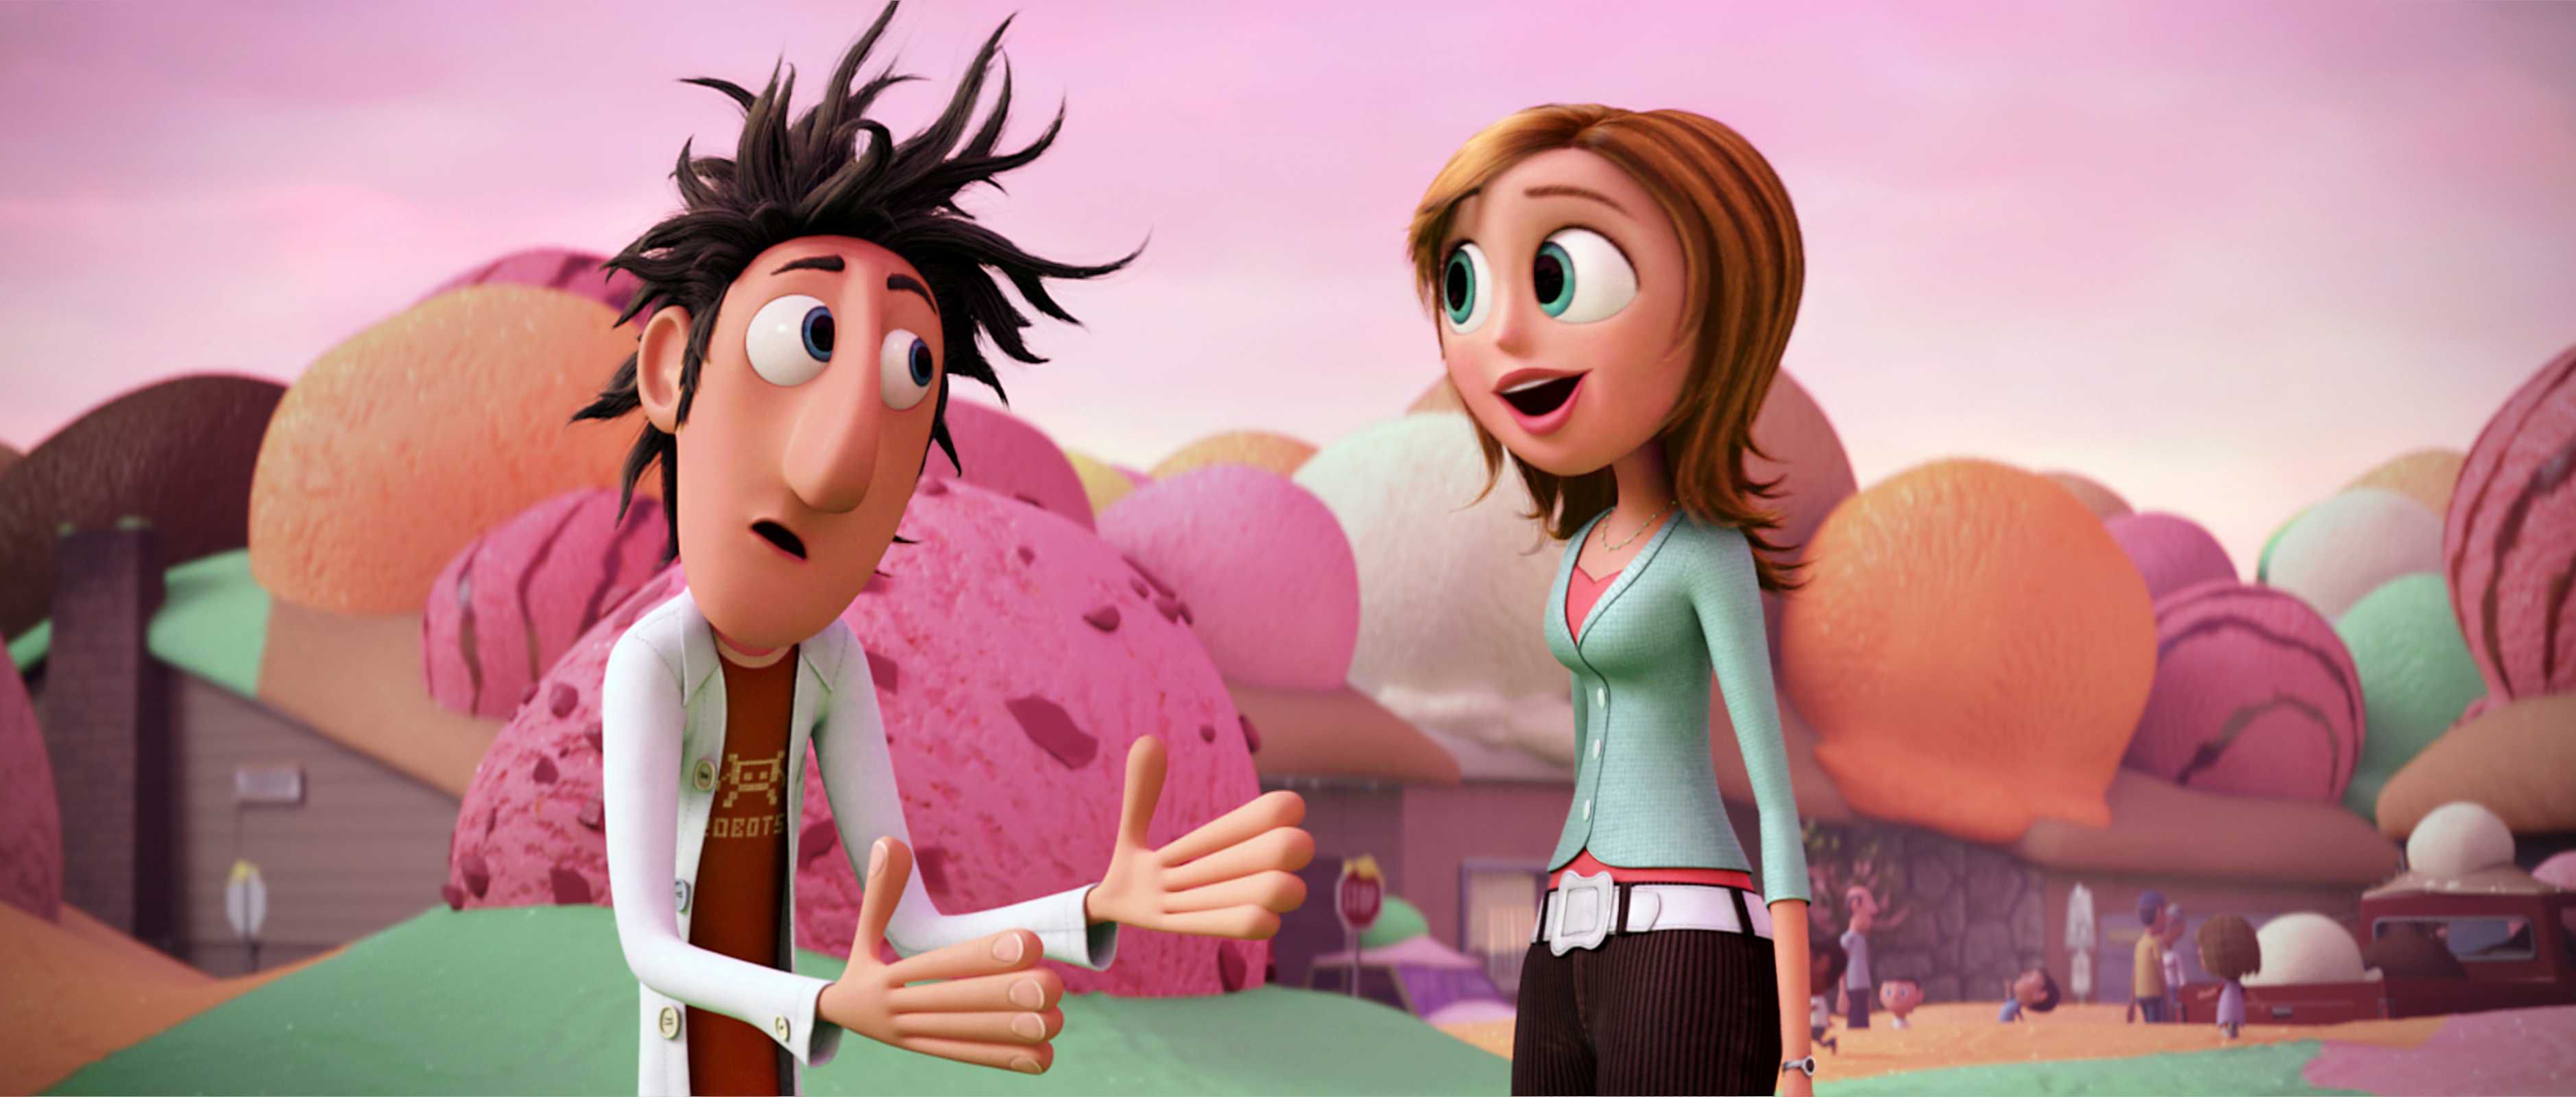 cloudy with a chance of meatballs, movie